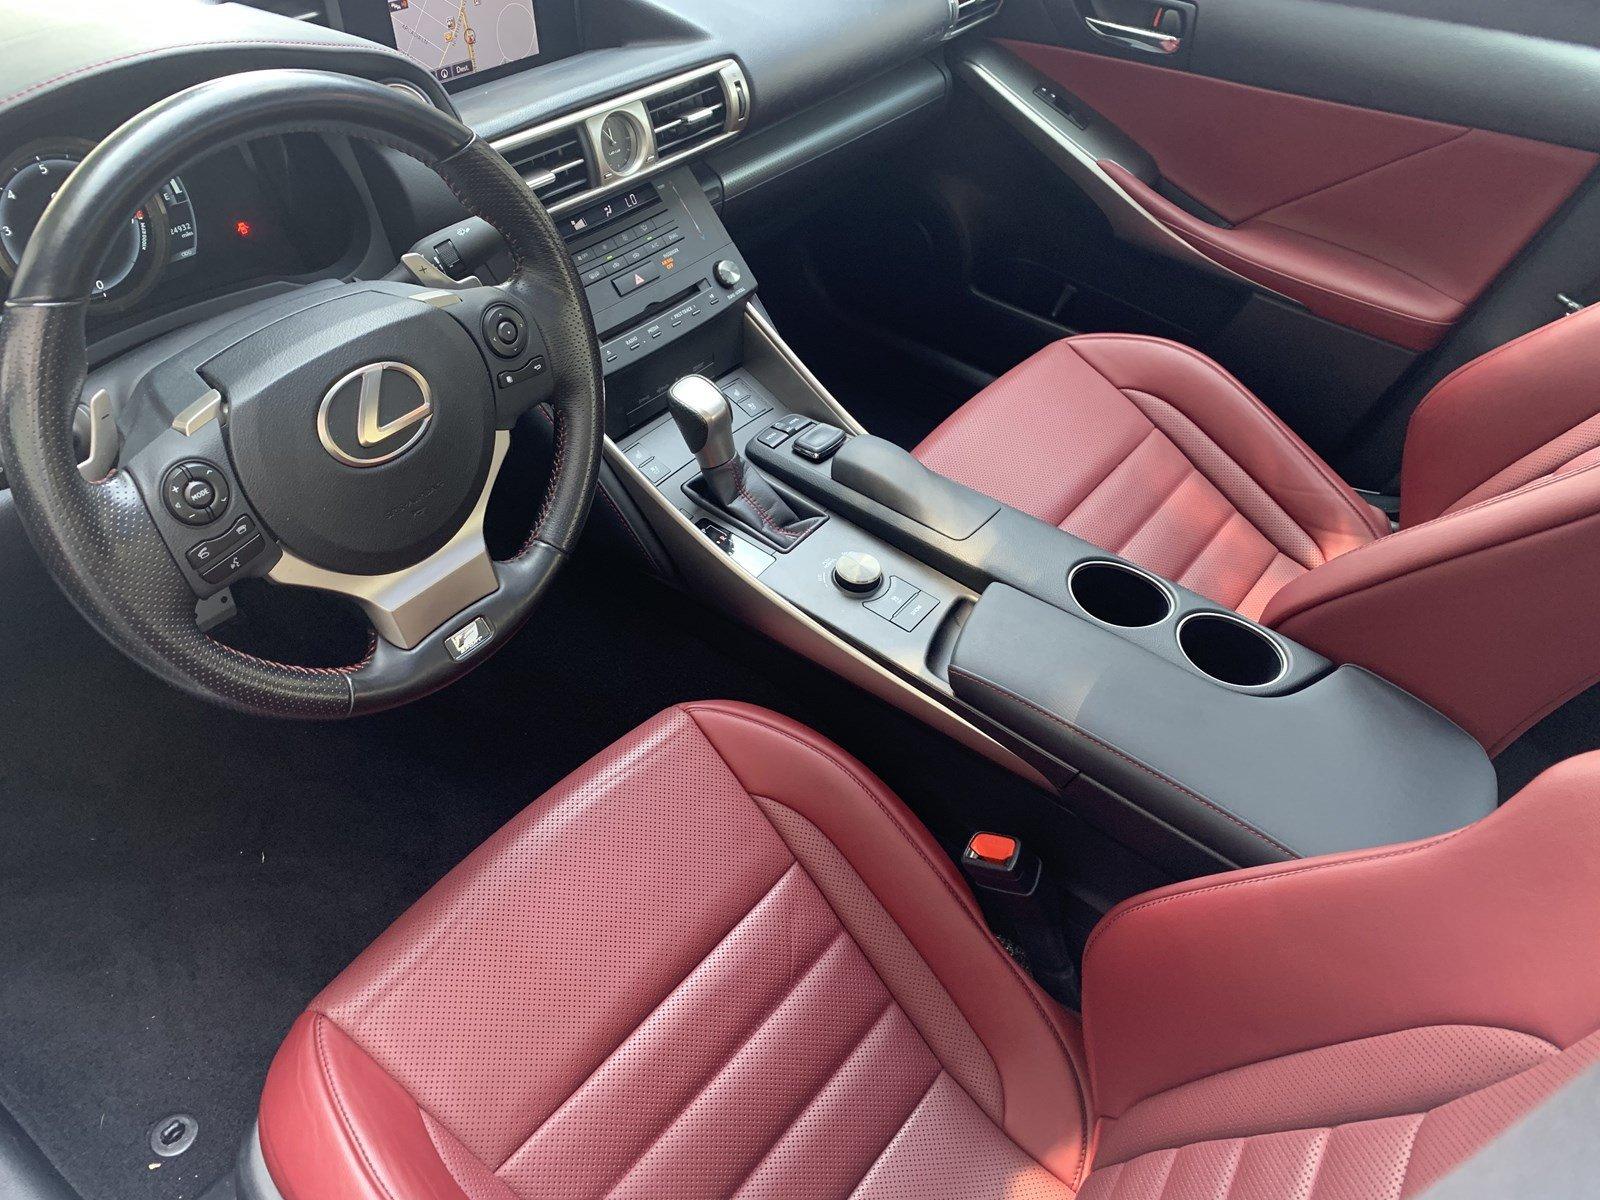 2016 Lexus IS 200t (Red Interior) Stock # C0141 for sale near Great Neck,  NY | NY Lexus Dealer